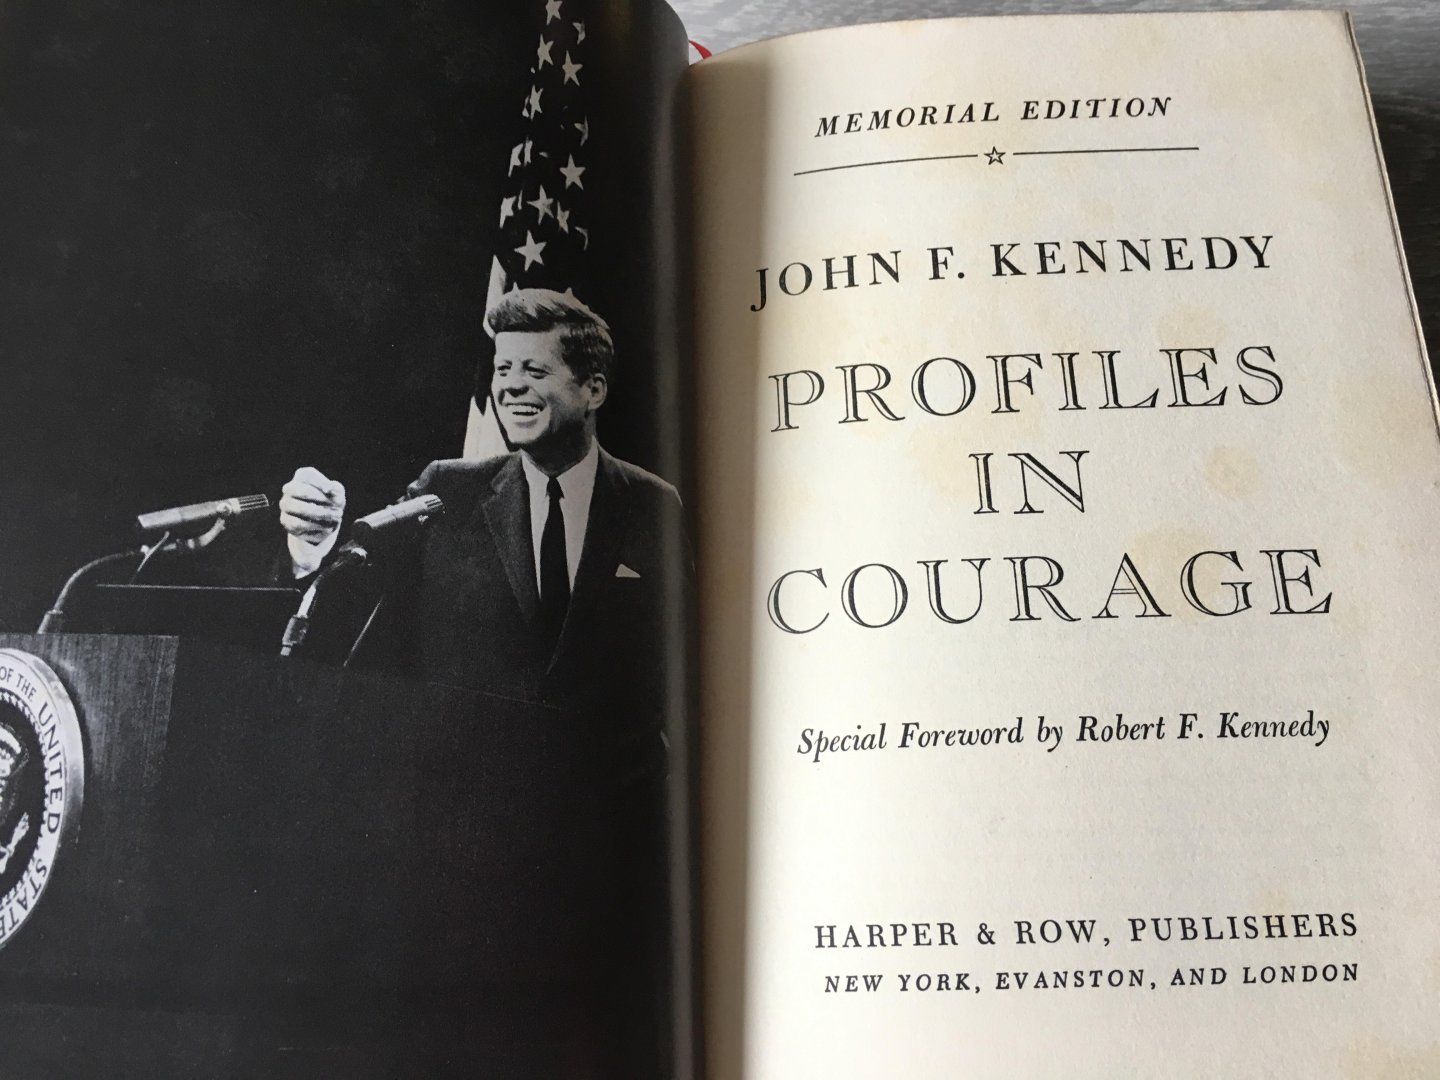 John F. Kennedy, Robert F. Kennedy - Memorial edition; John F. Kennedy, Profiles in courage, WITH EXTRA in memorial stamps!